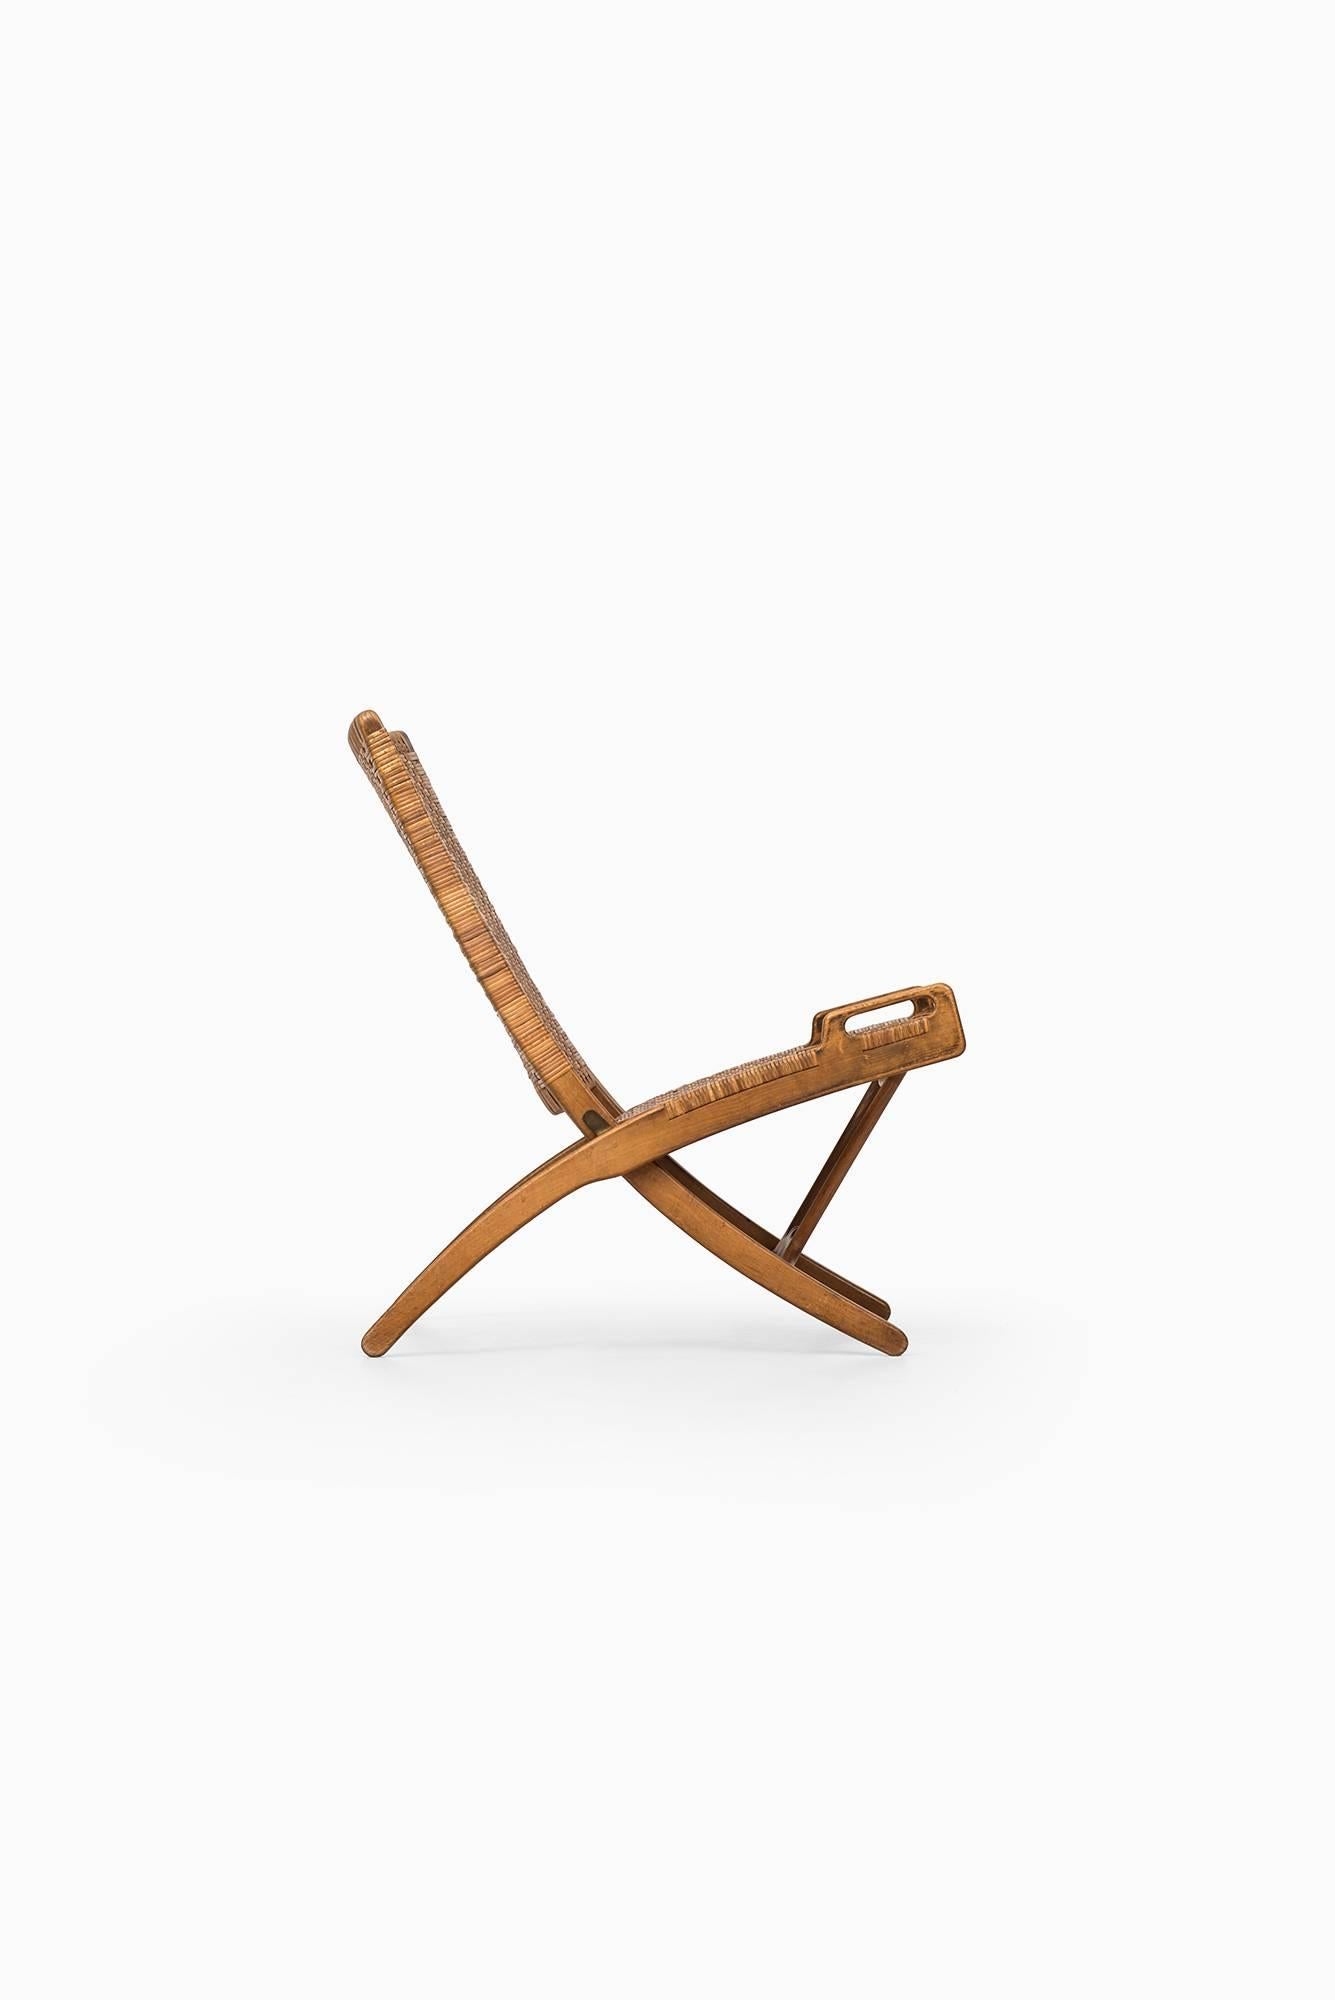 Rare and early folding chair model JH512 designed by Hans Wegner. Produced by Johannes Hansen in Denmark. Provenance: Acquired by previous owner’s family at the Cabinetmakers’ Guild Exhibition 1950.